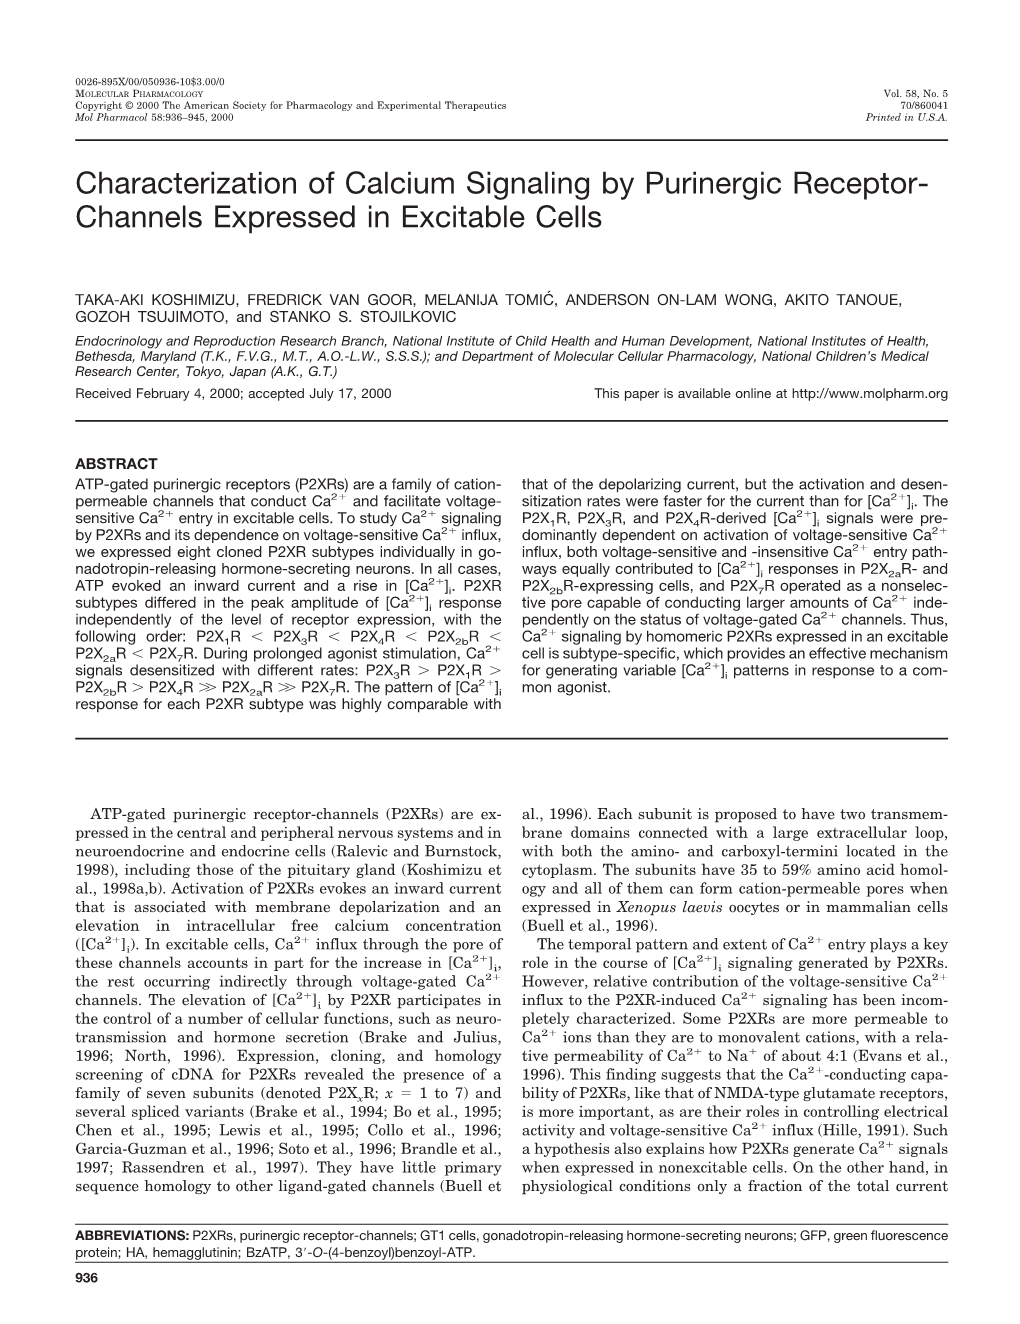 Characterization of Calcium Signaling by Purinergic Receptor- Channels Expressed in Excitable Cells